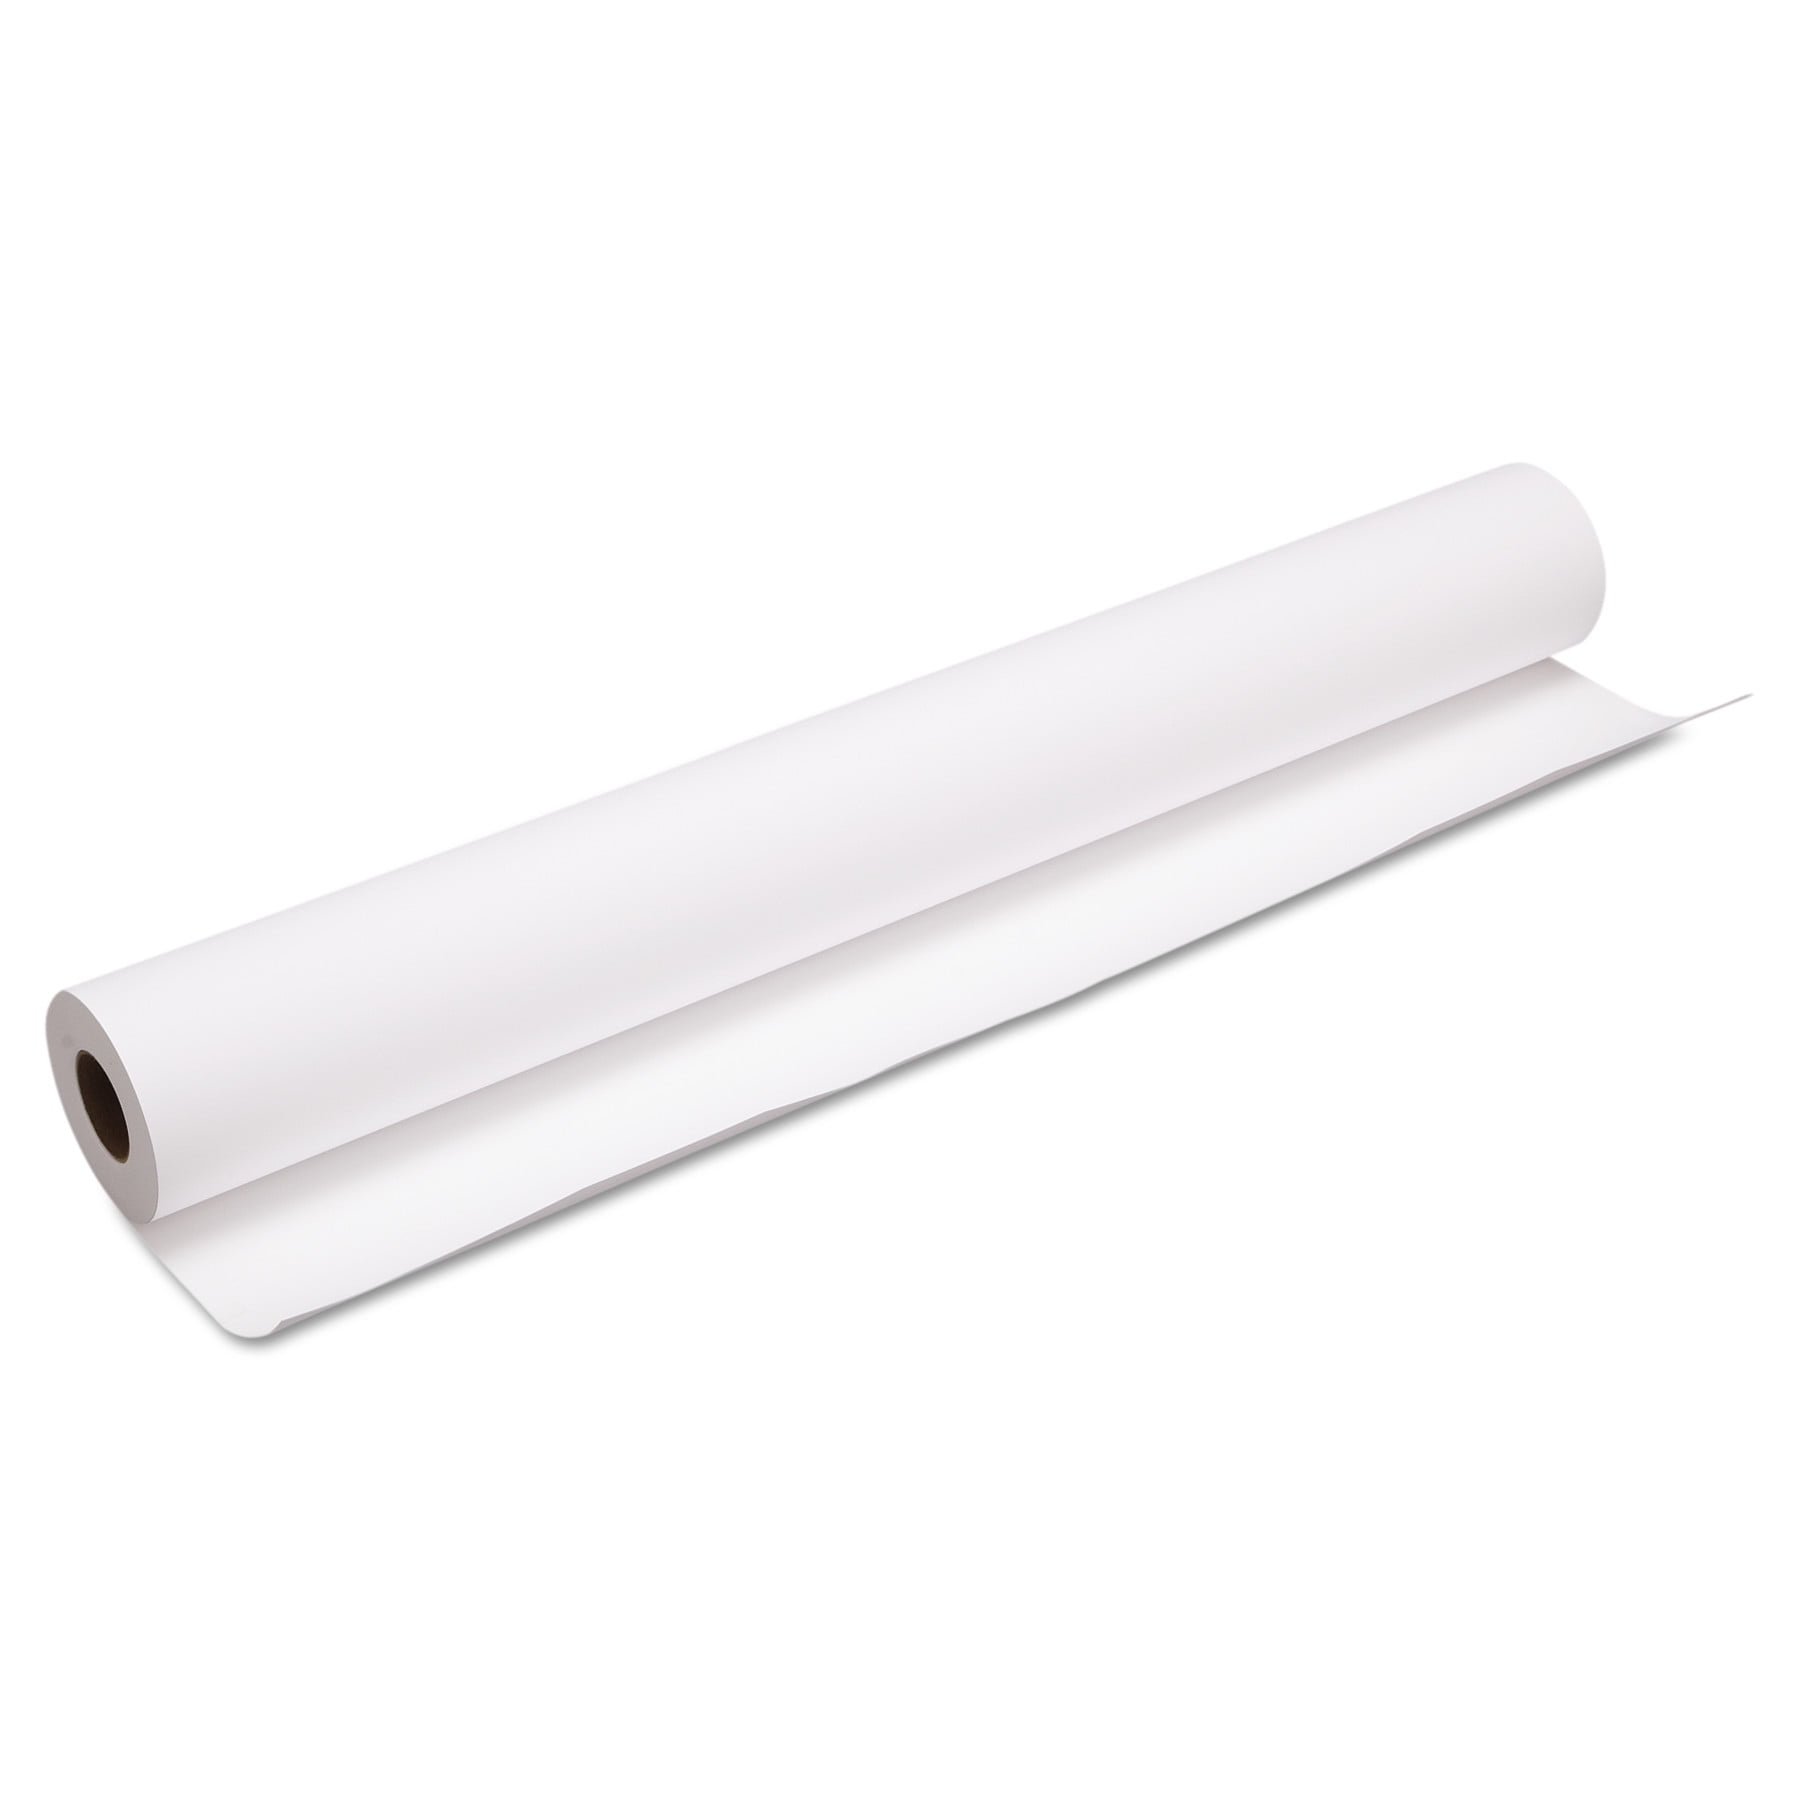 1) 36 x 100' Roll - Satin Poster Paper